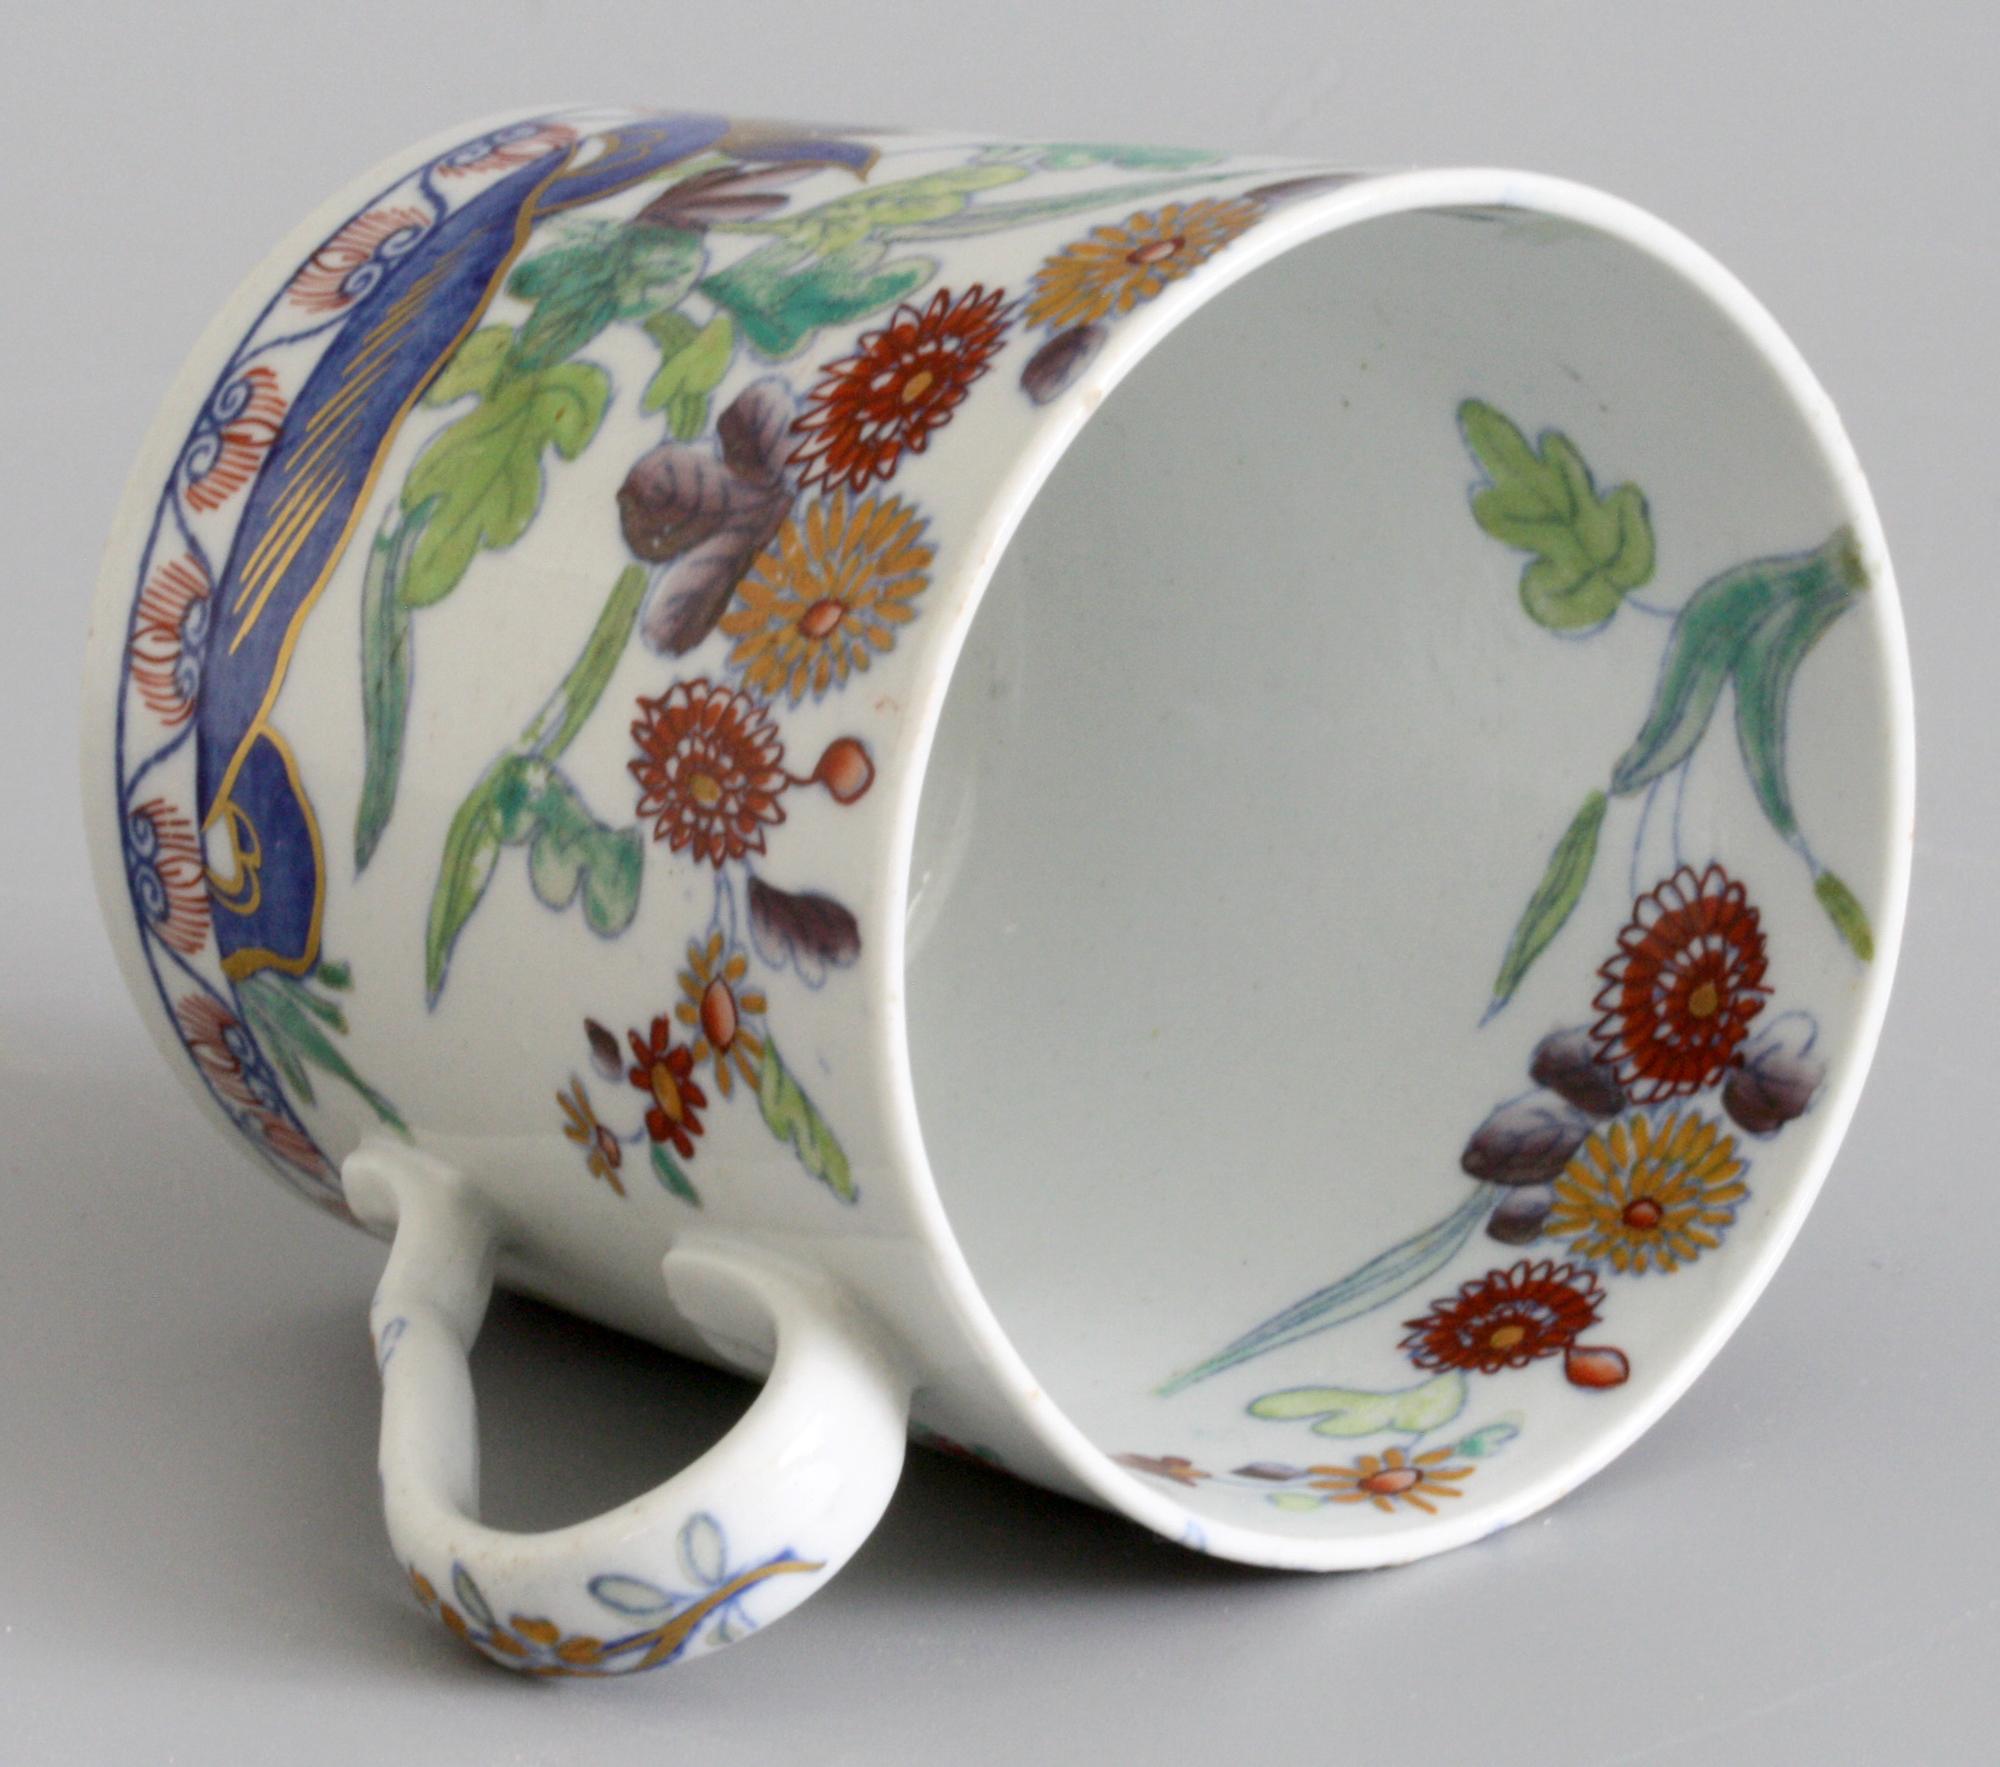 Georgian Spode Stone China Coffee Can with Tree in Landscape Pattern 2117, circa 1815